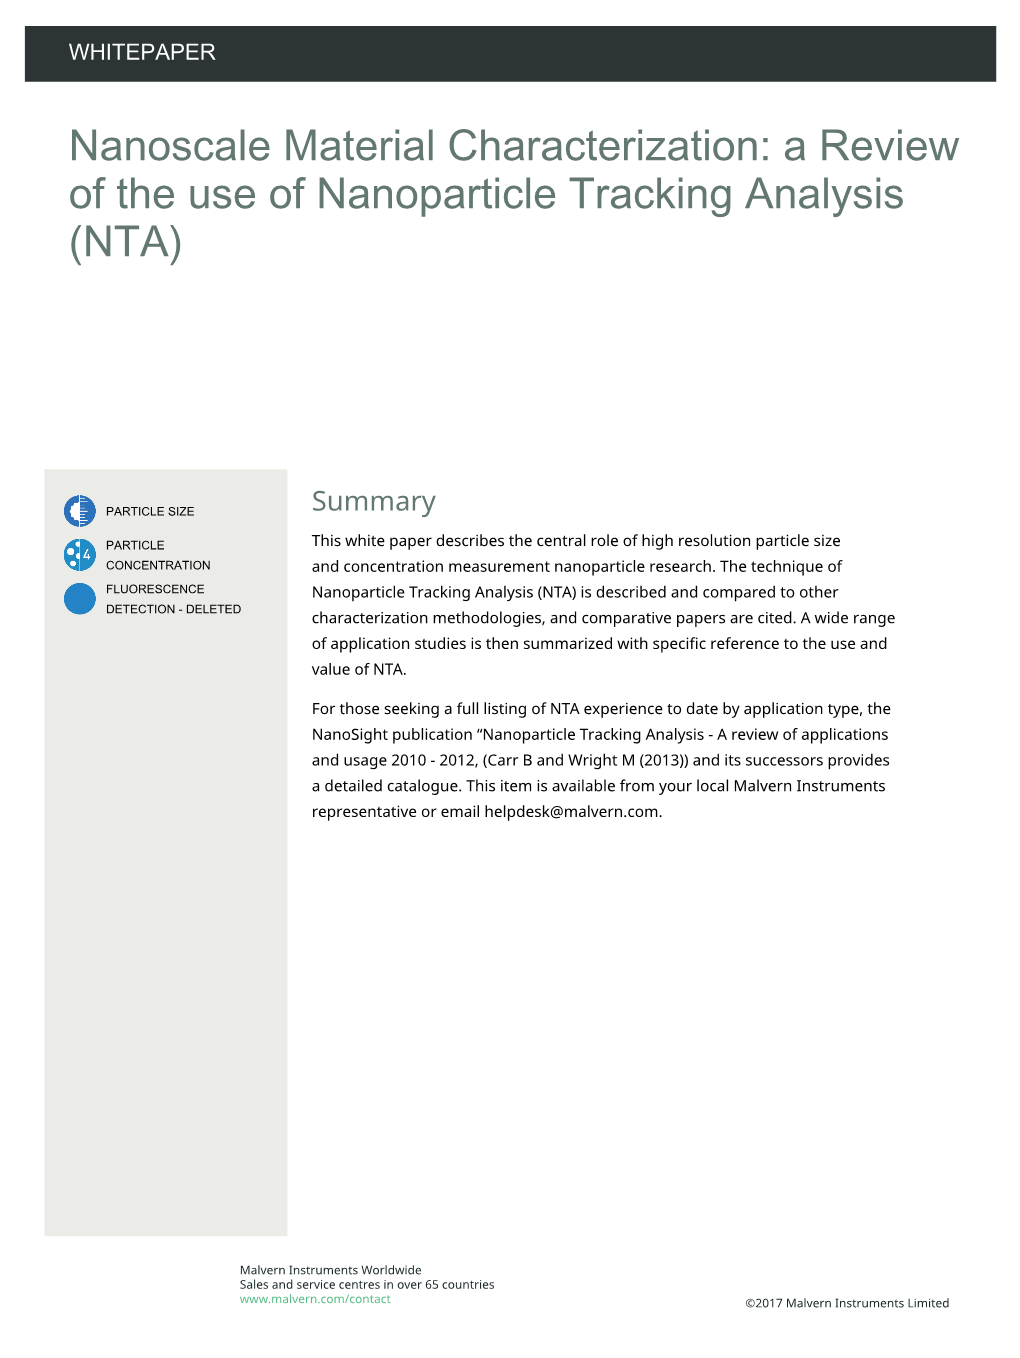 A Review of the Use of Nanoparticle Tracking Analysis (NTA)